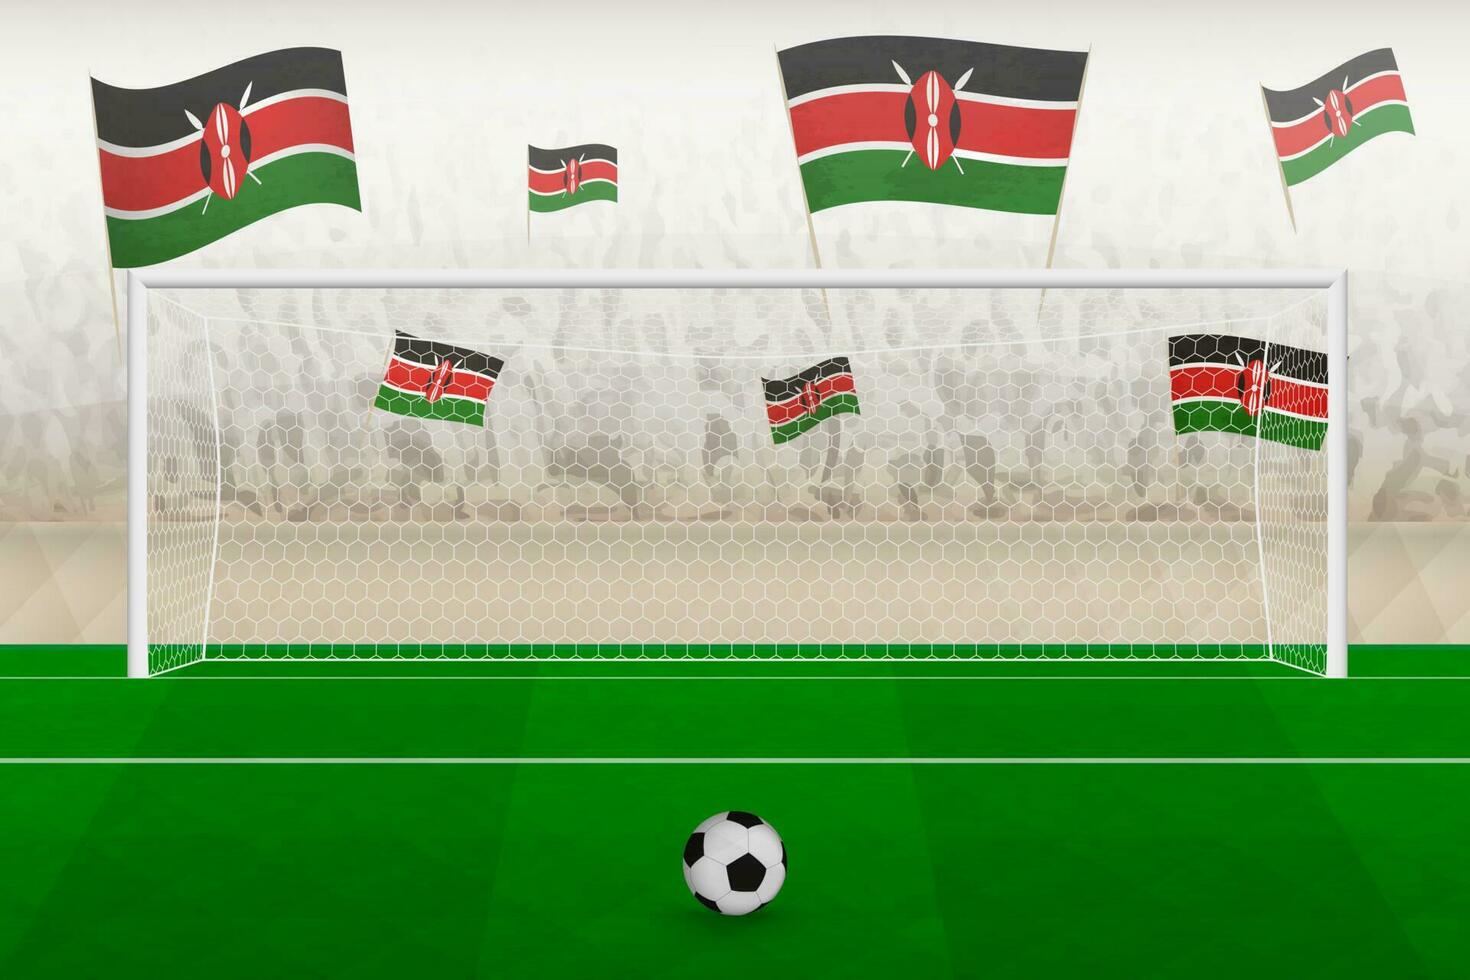 Kenya football team fans with flags of Kenya cheering on stadium, penalty kick concept in a soccer match. vector